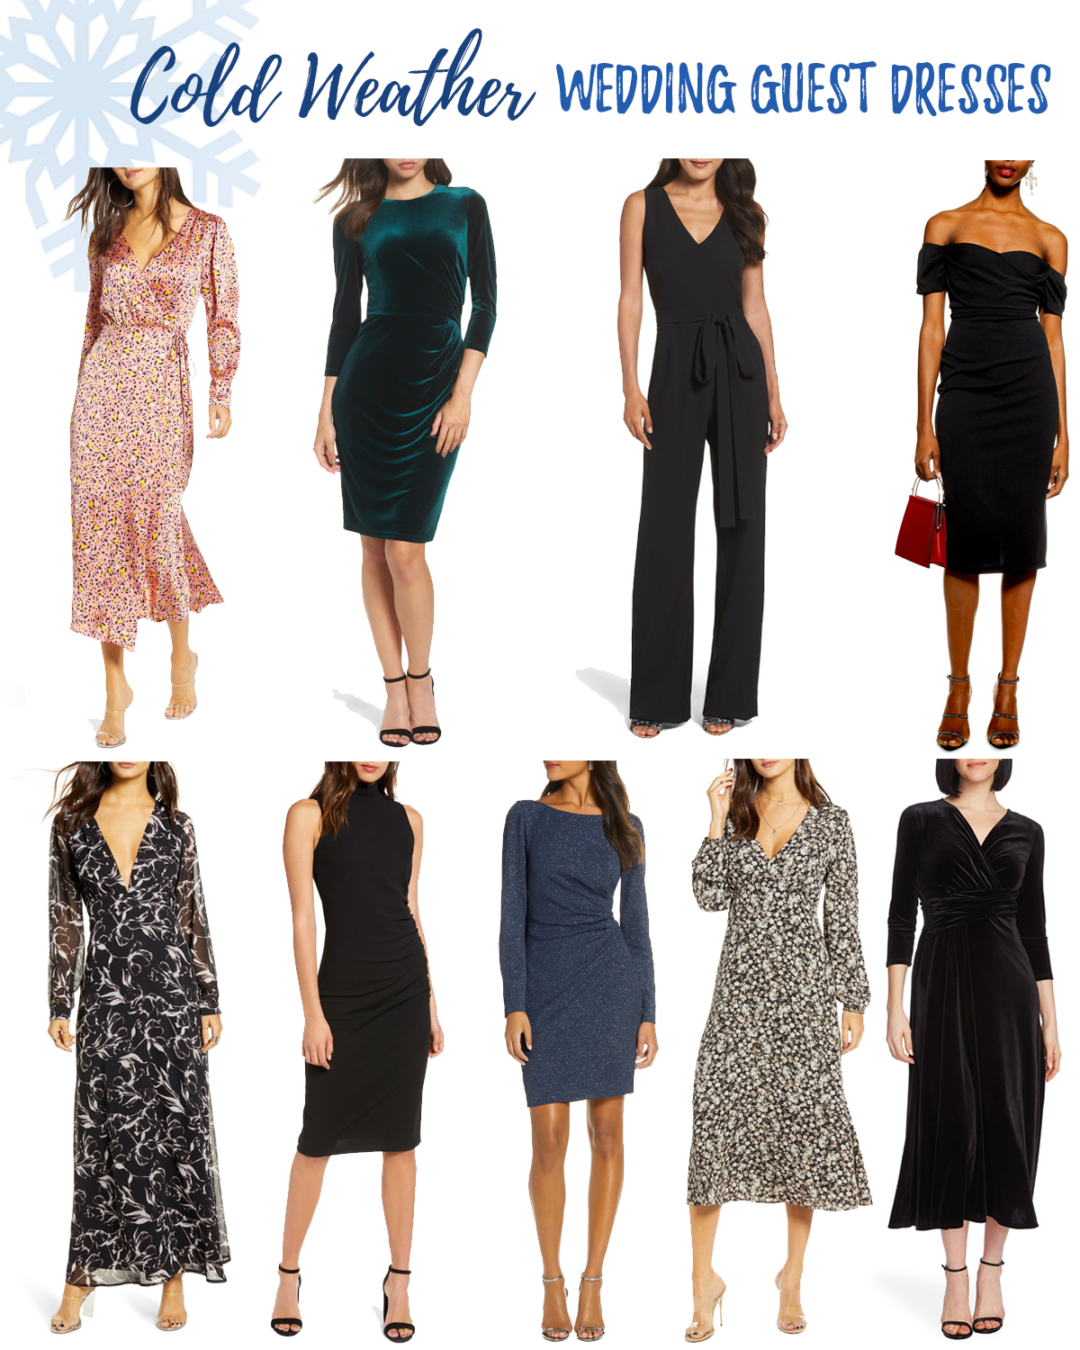 cold weather friendly wedding guest dresses for fall and winter weddings